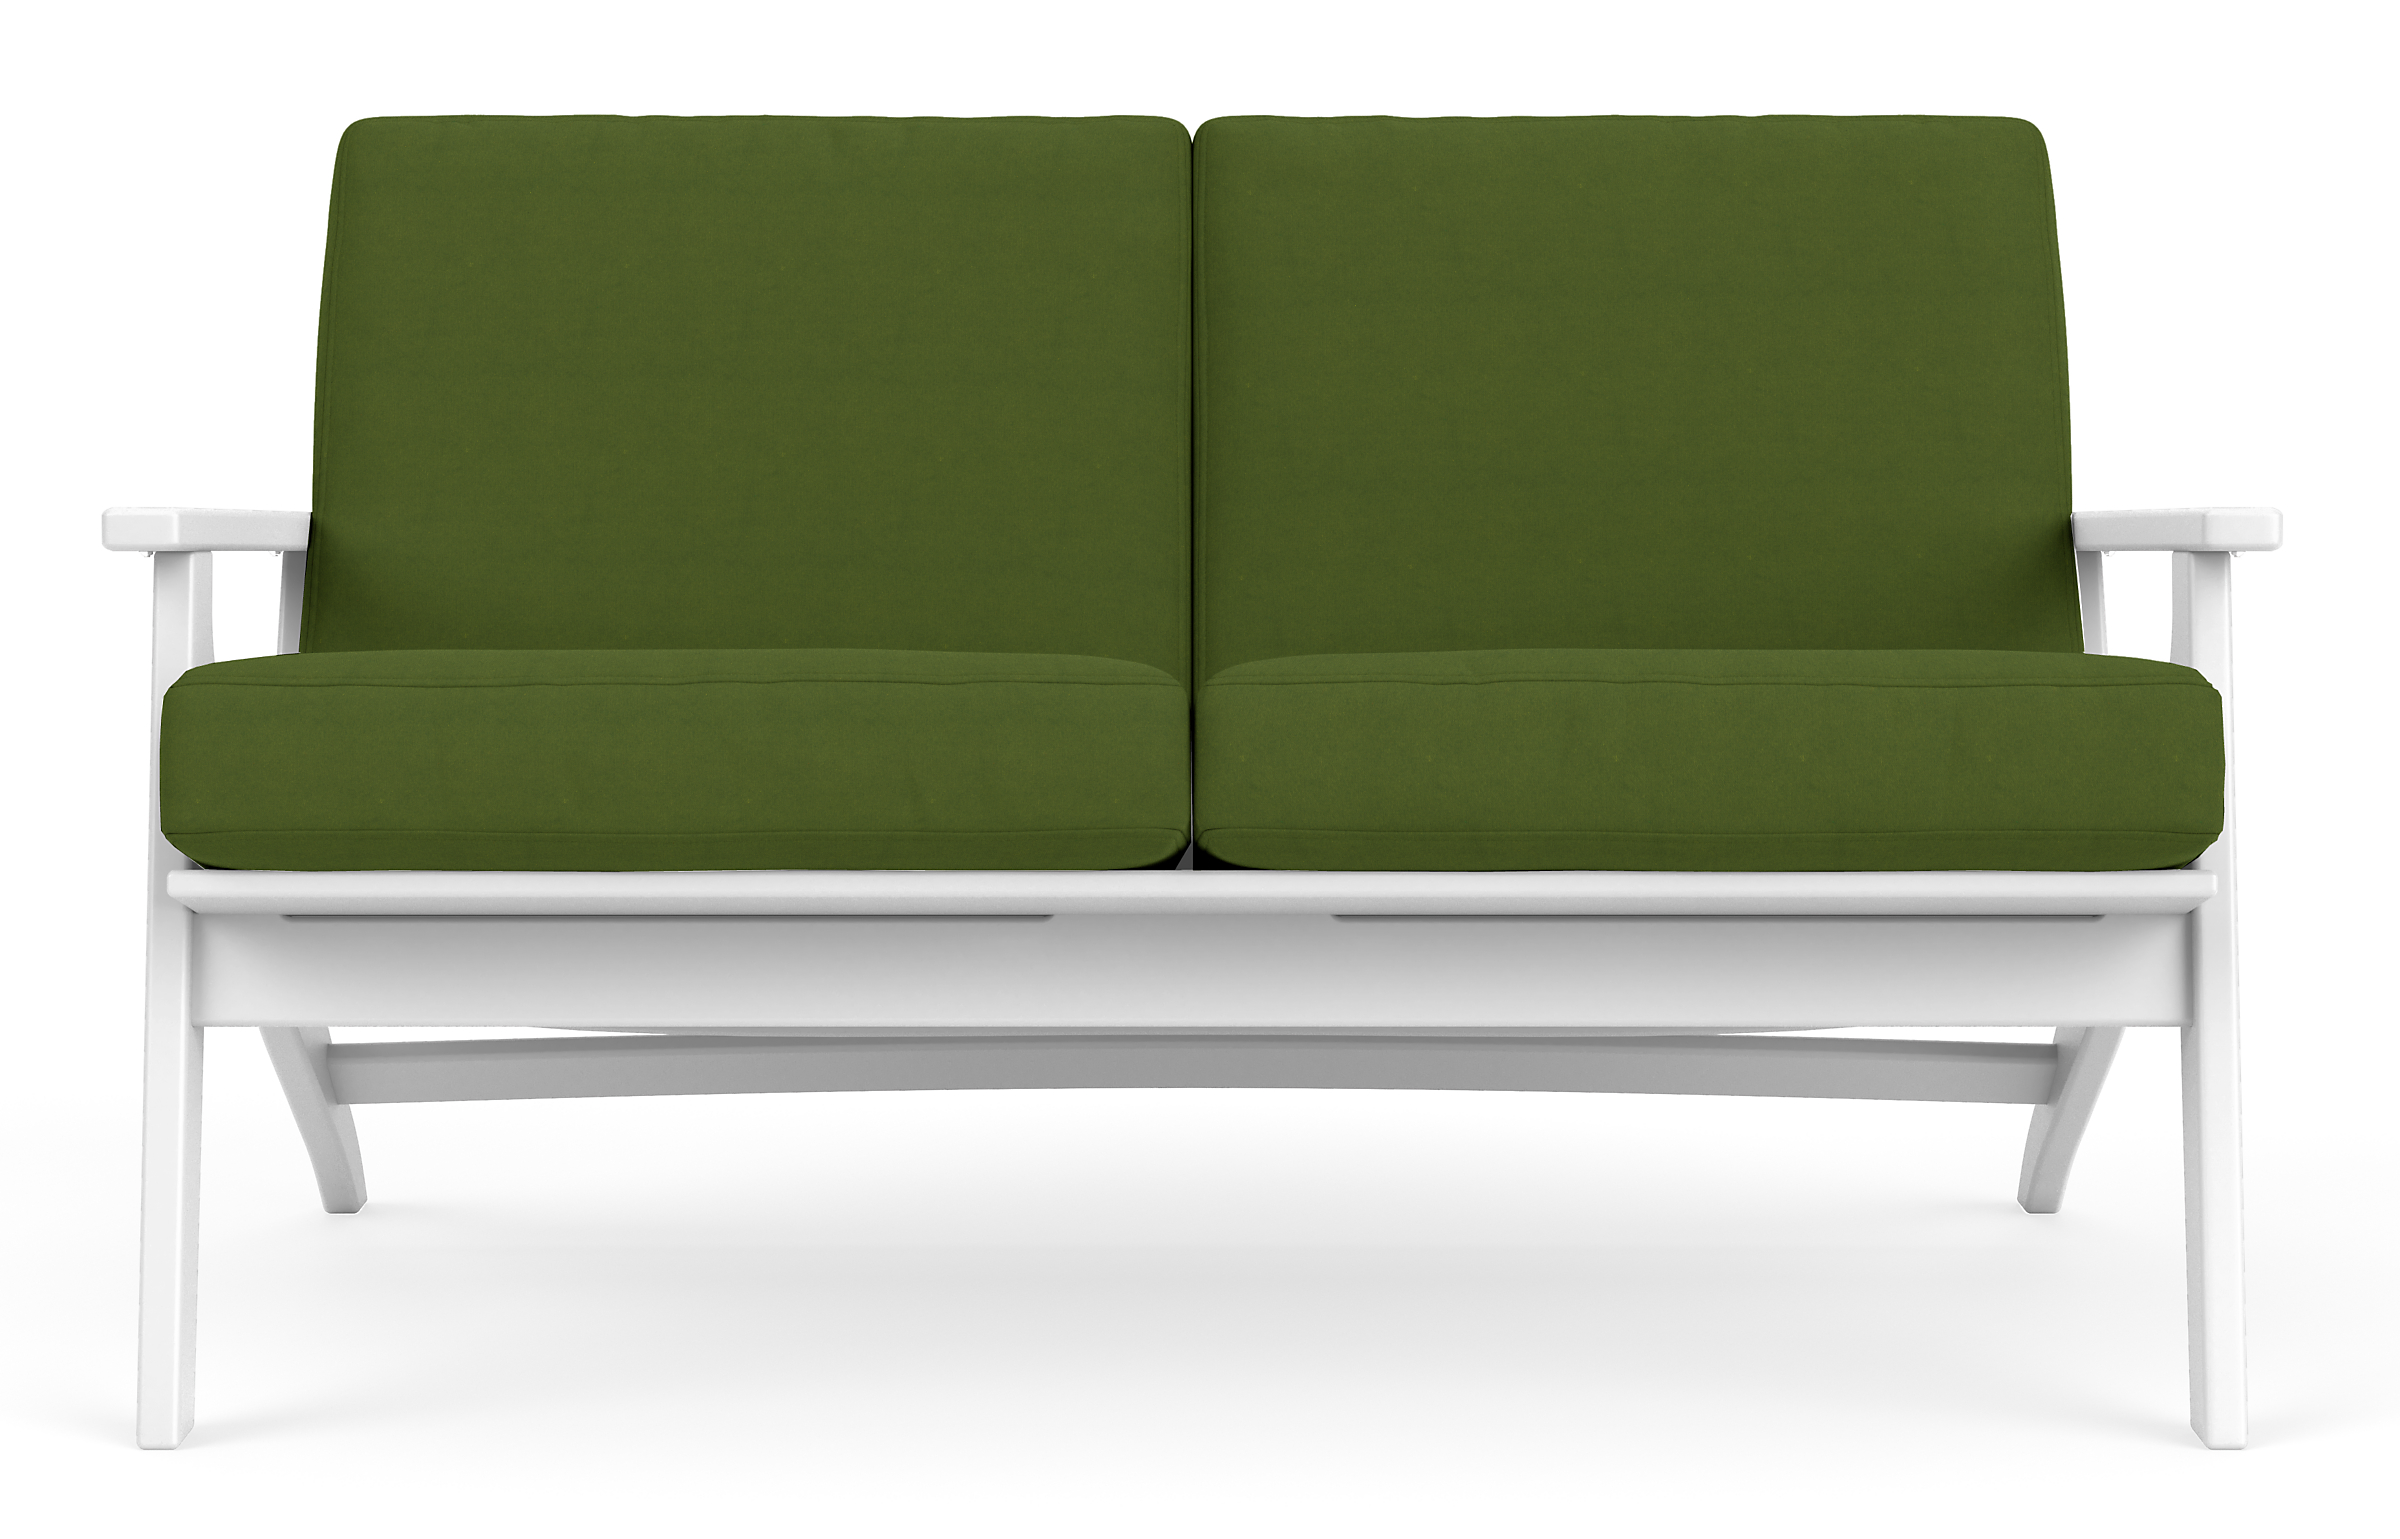 Breeze Sofa in Tristan Green with White HDPE Frame